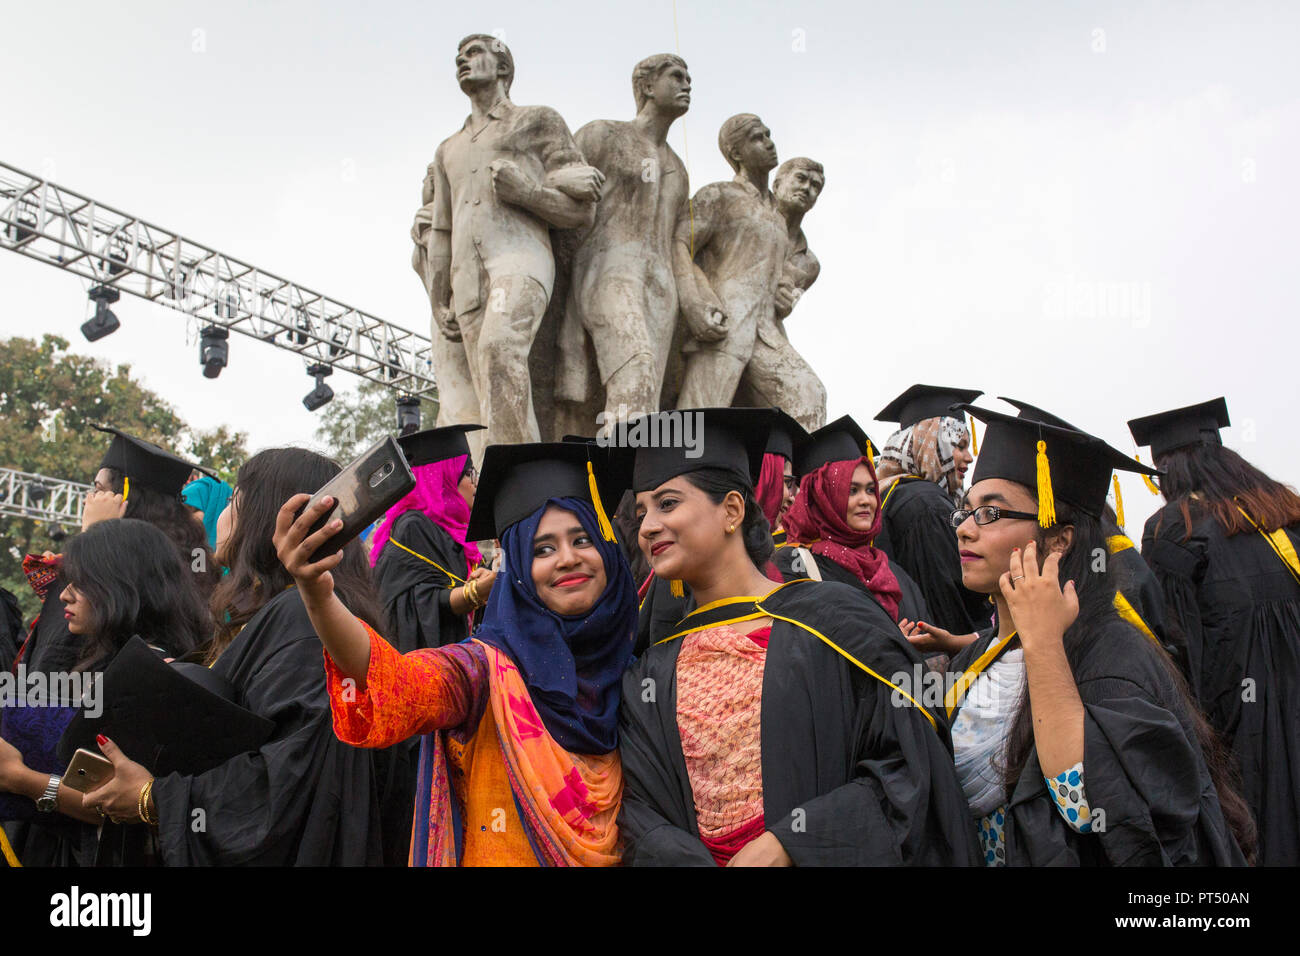 Dhaka, Bangladesh. 6th Oct 2018.  A group of graduates expressing their delight in front of the sculpture Raju at TSC area, on the 51th convocation of the students of Dhaka University in Dhaka , Bangladesh on October 06, 2018.  The University of Dhaka or simply DU, is the oldest university in modern Bangladesh. Established during the British Raj in 1921, it gained a reputation as the 'Oxford of the East' during its early years and has been a significant contributor to the modern history of Bangladesh. Credit: zakir hossain chowdhury zakir/Alamy Live News Stock Photo